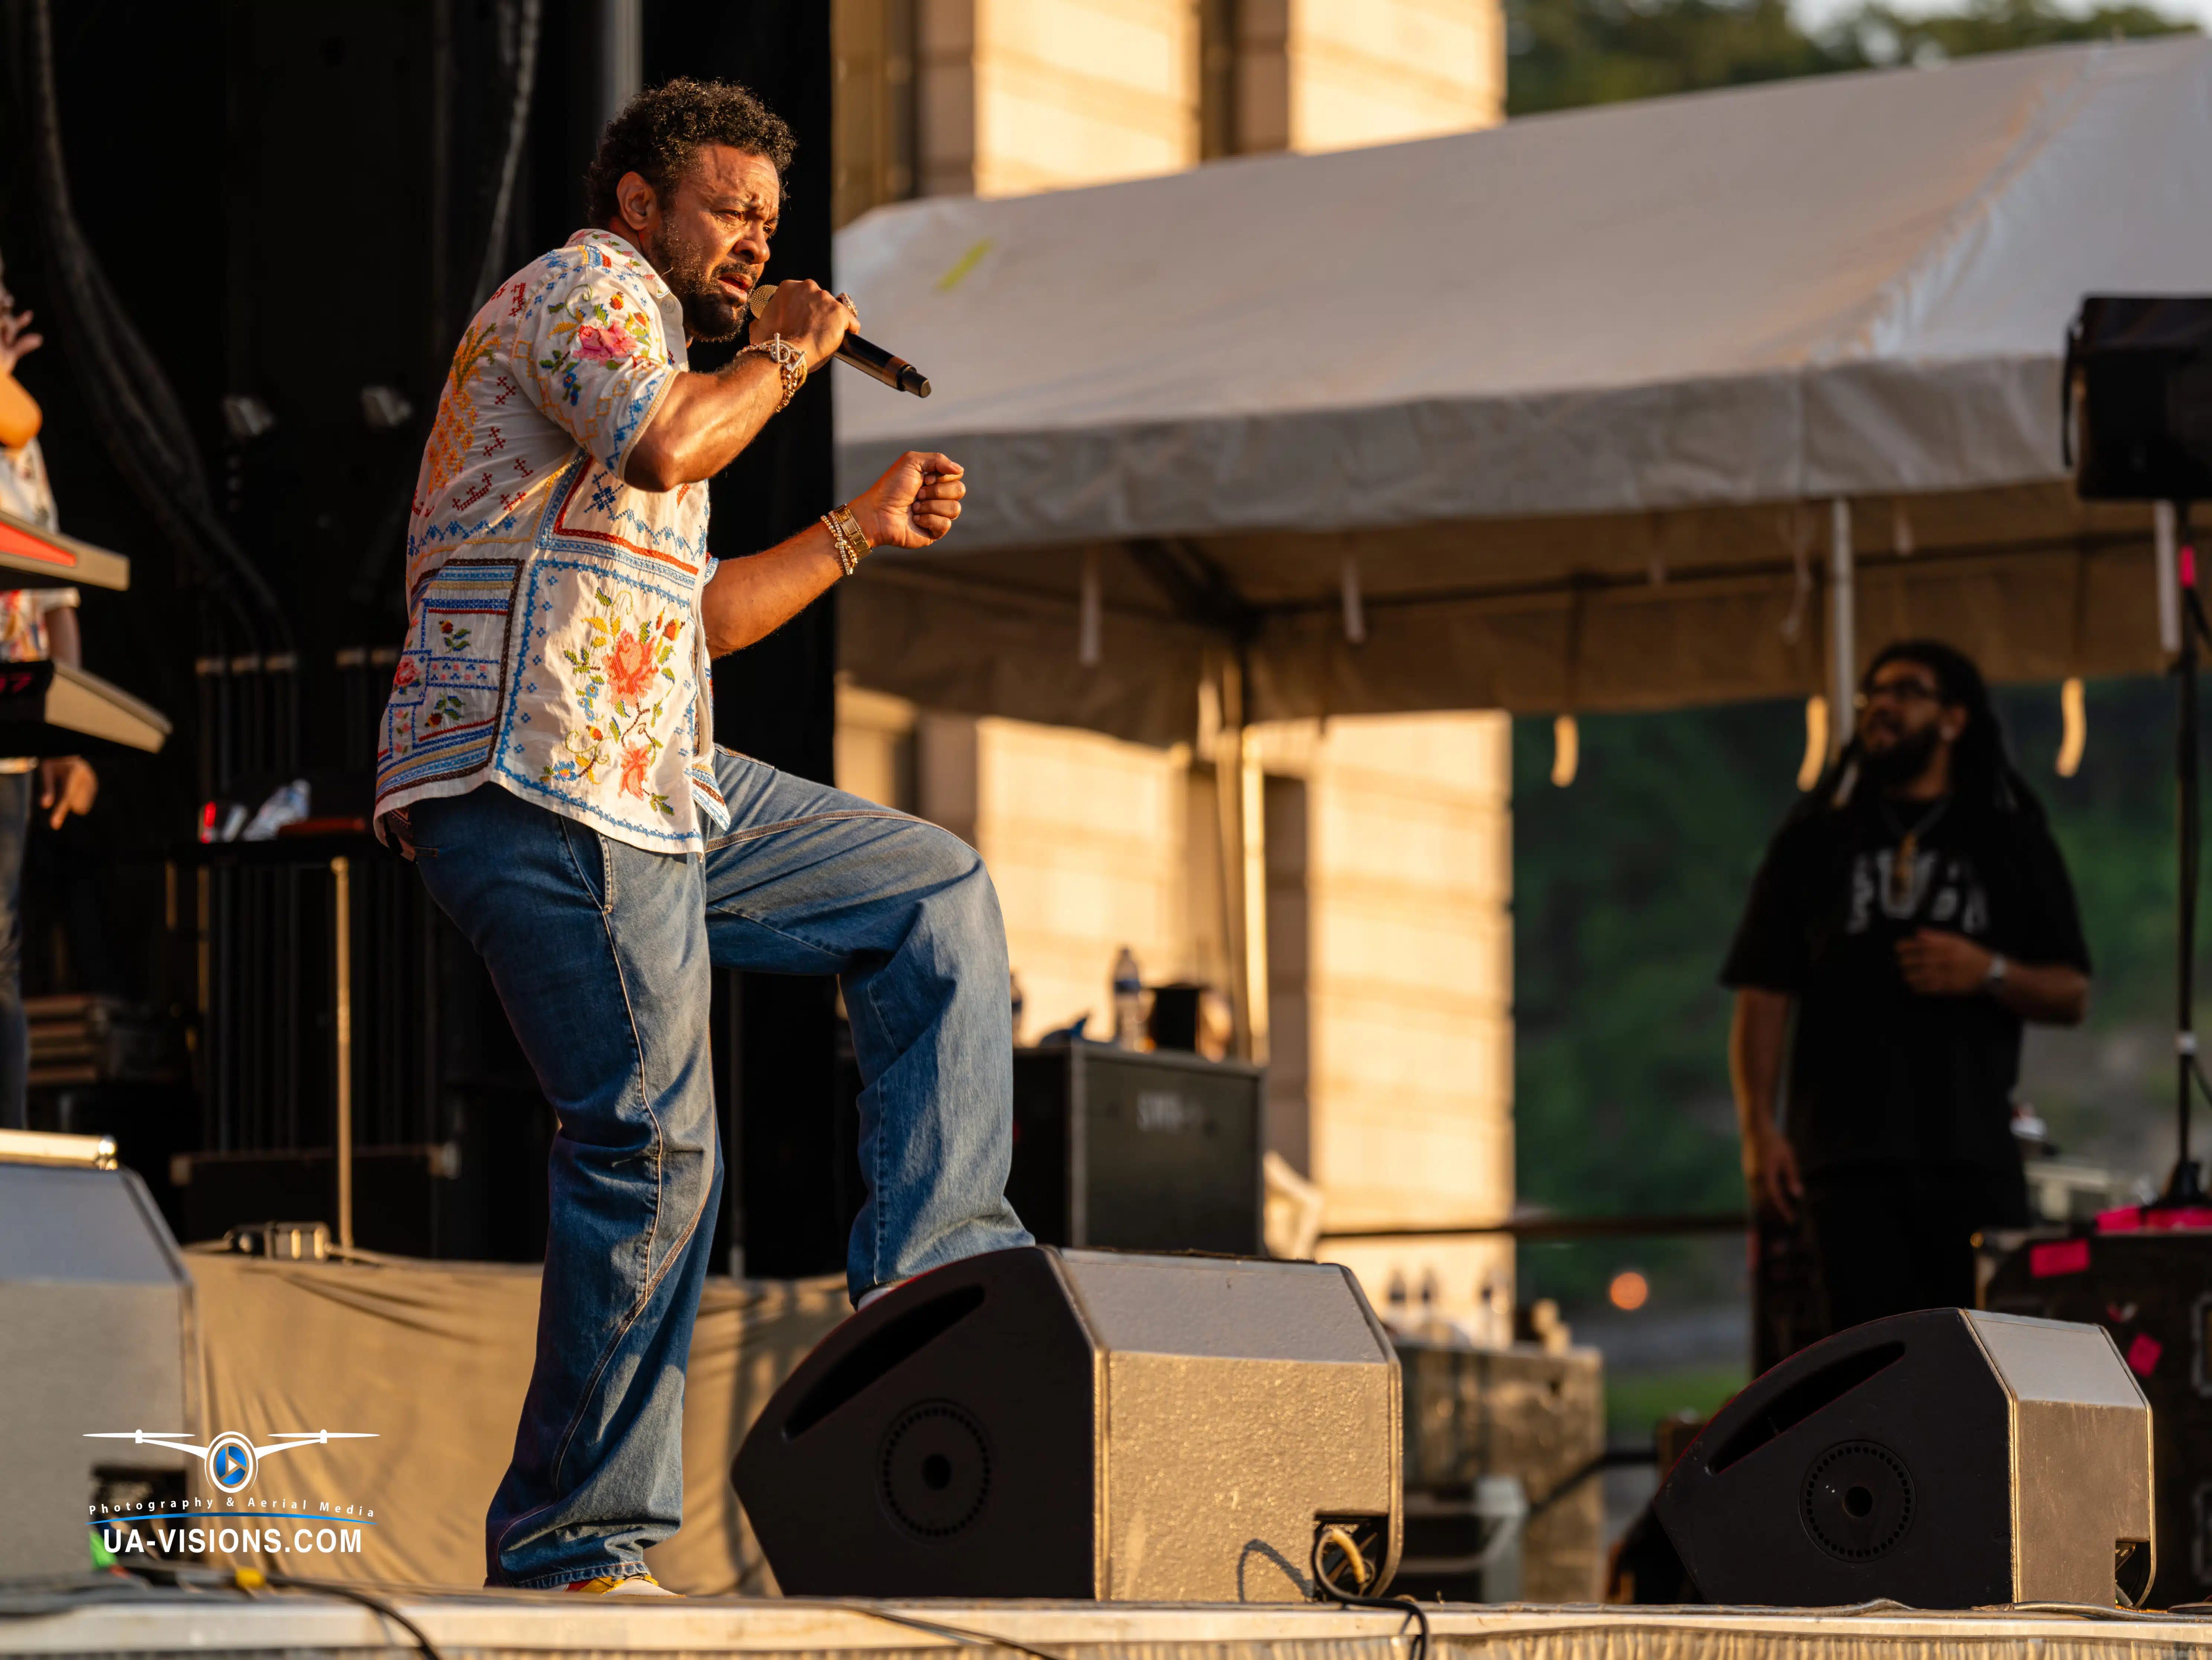 The live concert by Shaggy at the 2024 Charleston Sternwheel Regatta taken by the UA-Visions Team